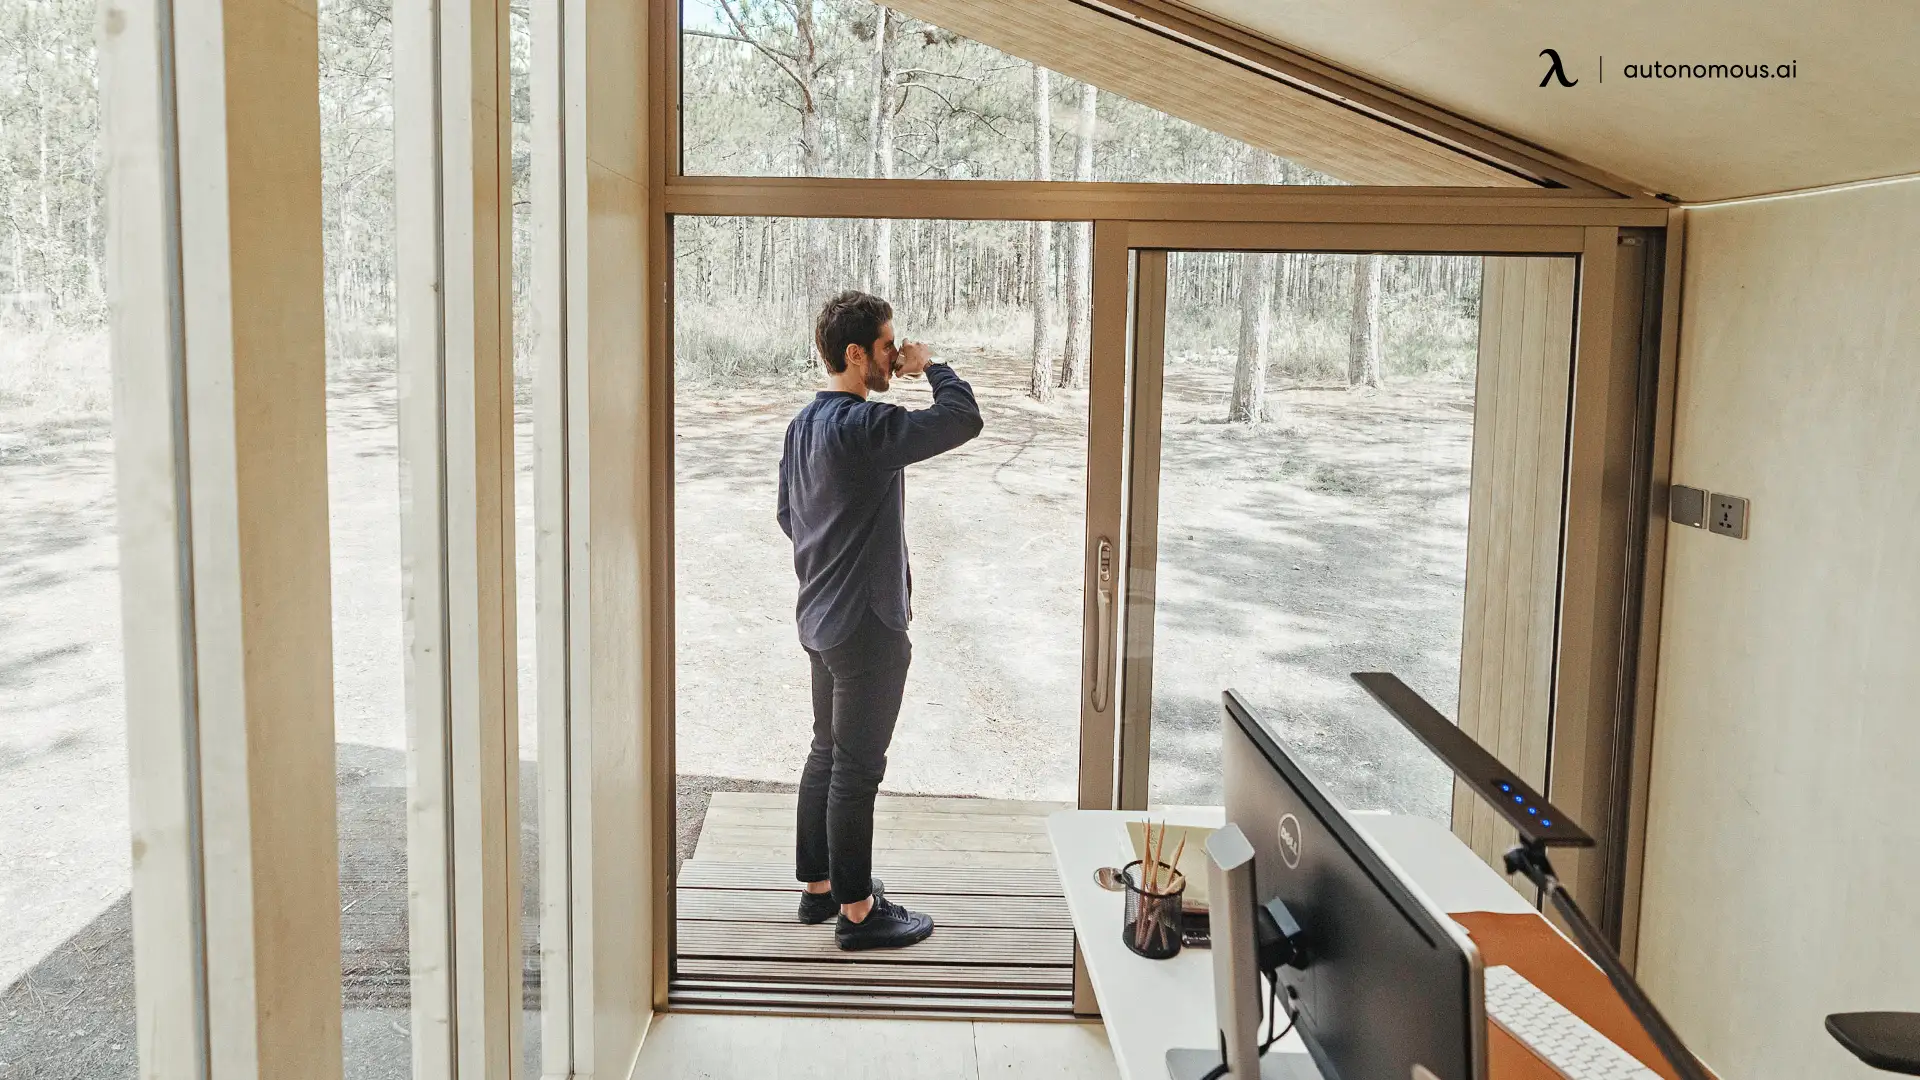 Allows Remote Workers to Spend Time Outdoors